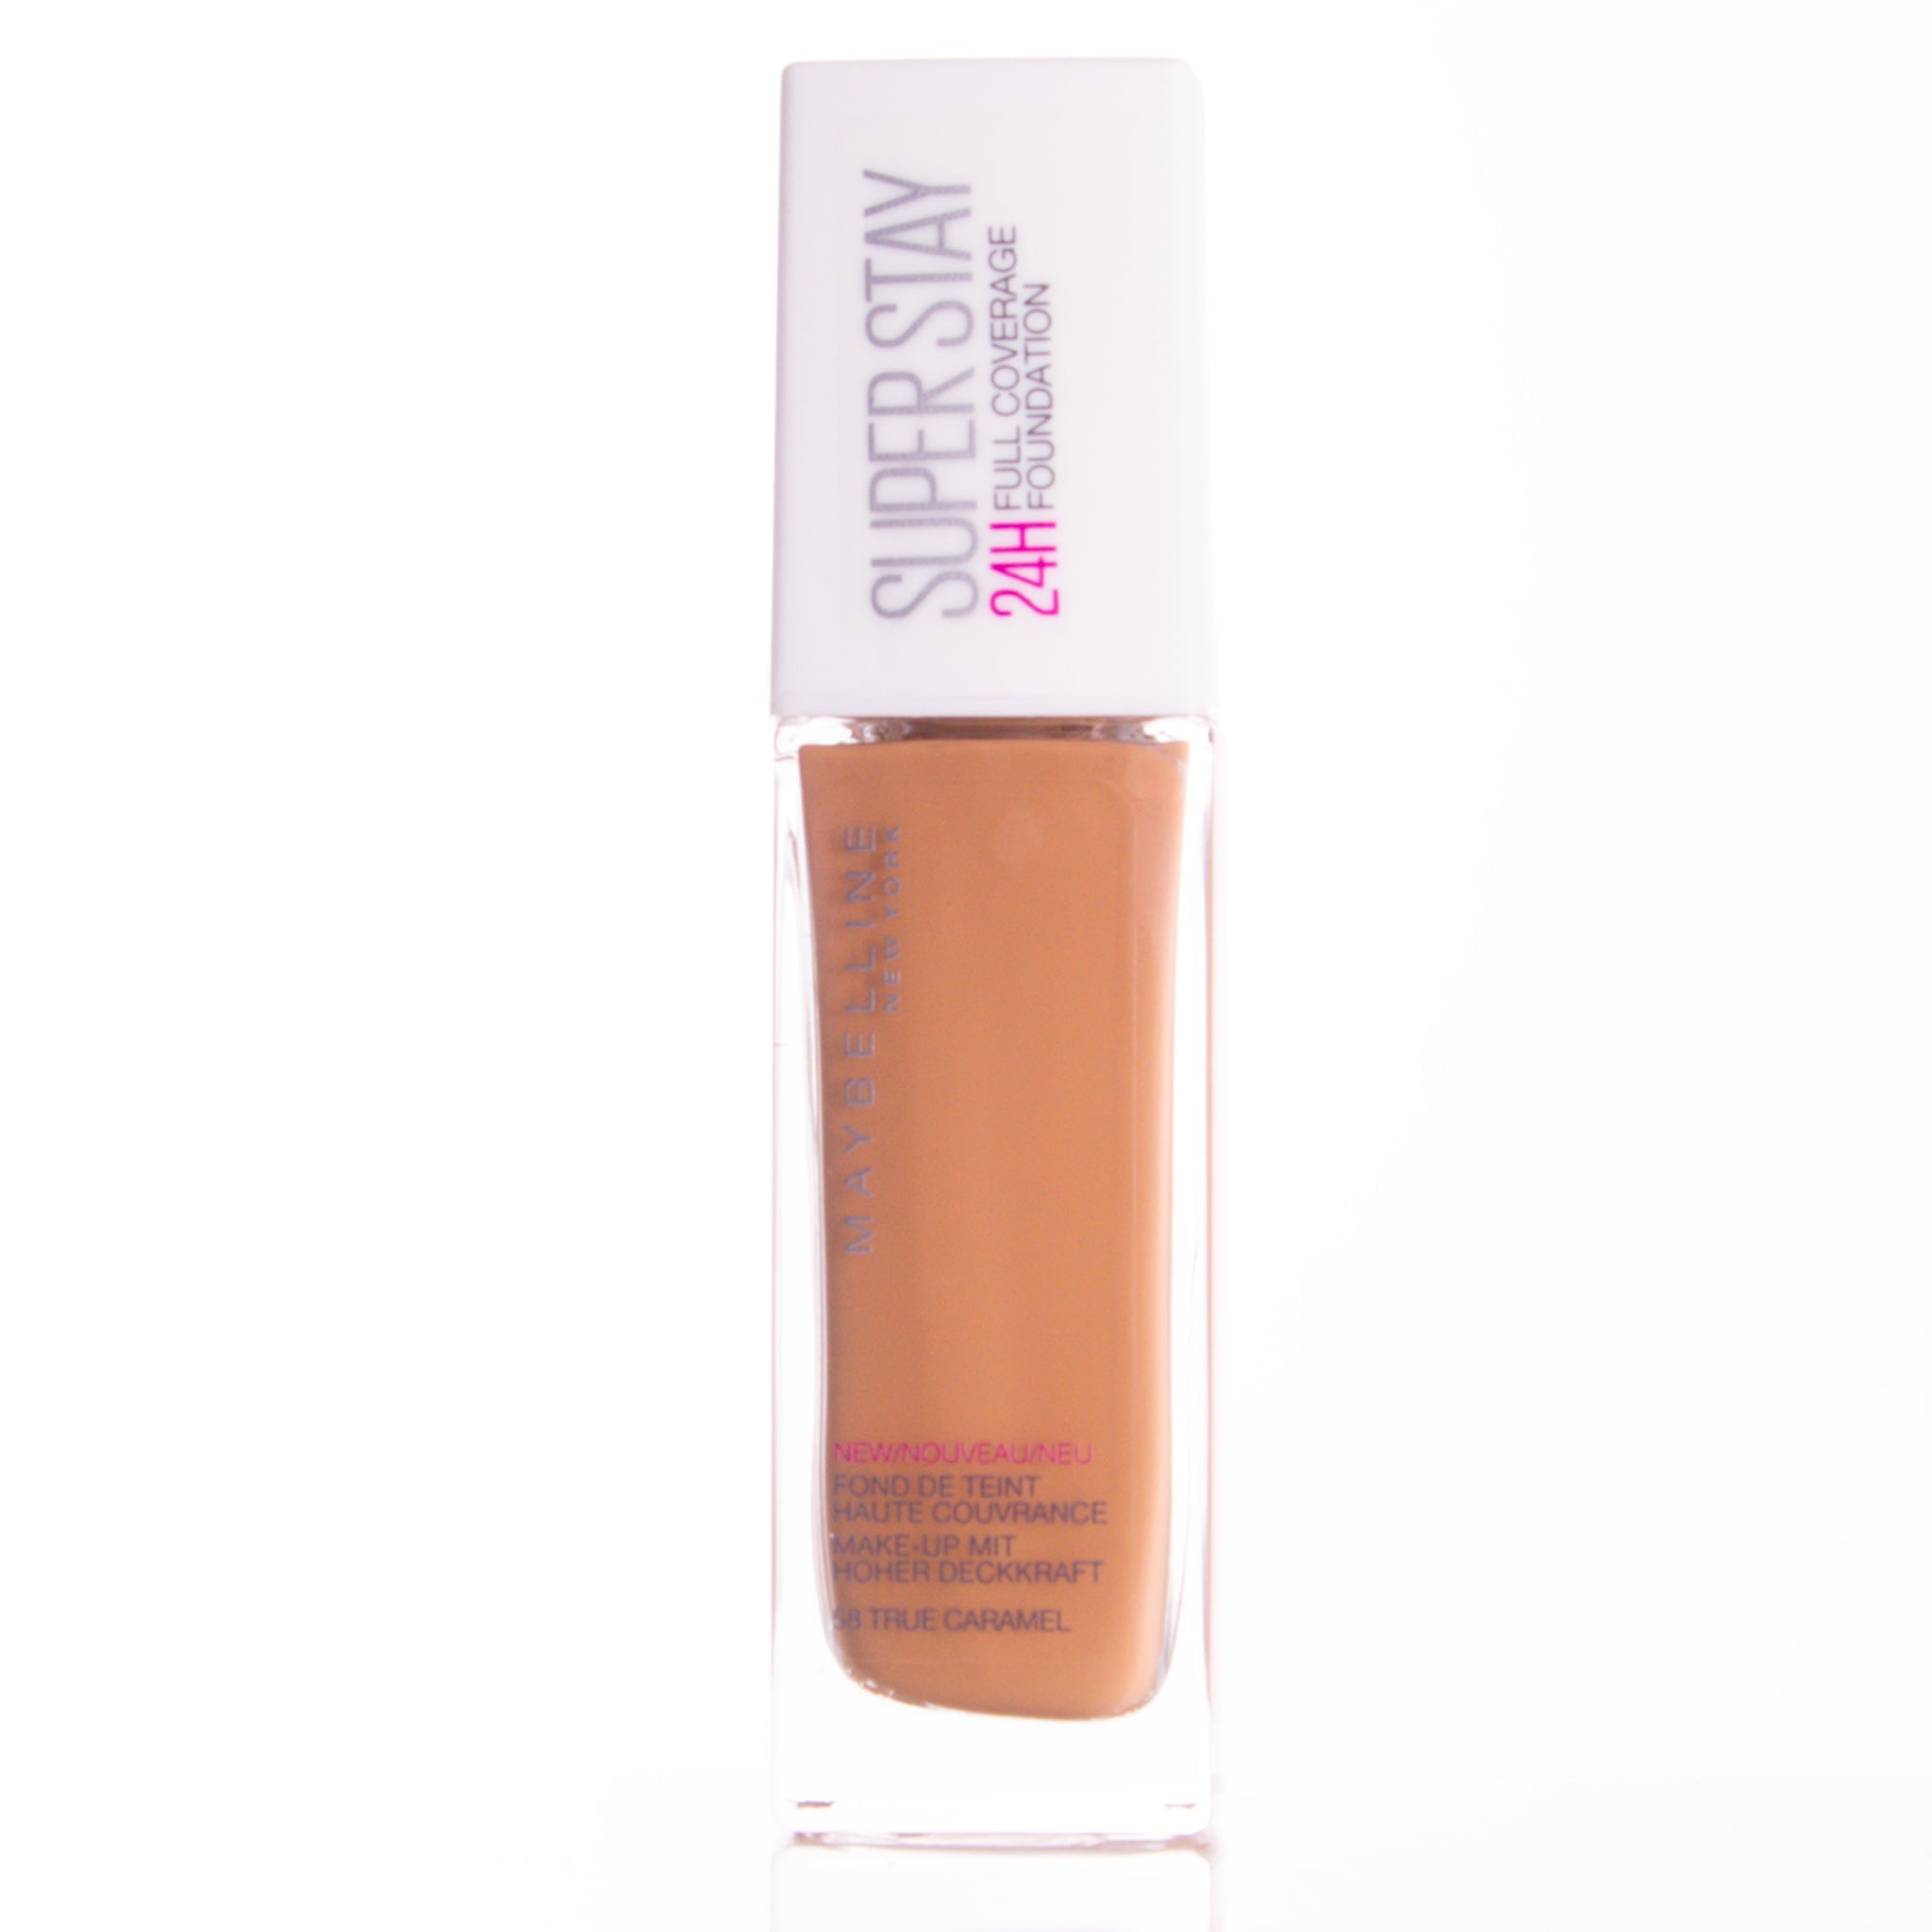 Maybelline Superstay 24H Full Coverage Foundation - 58 True Caramel